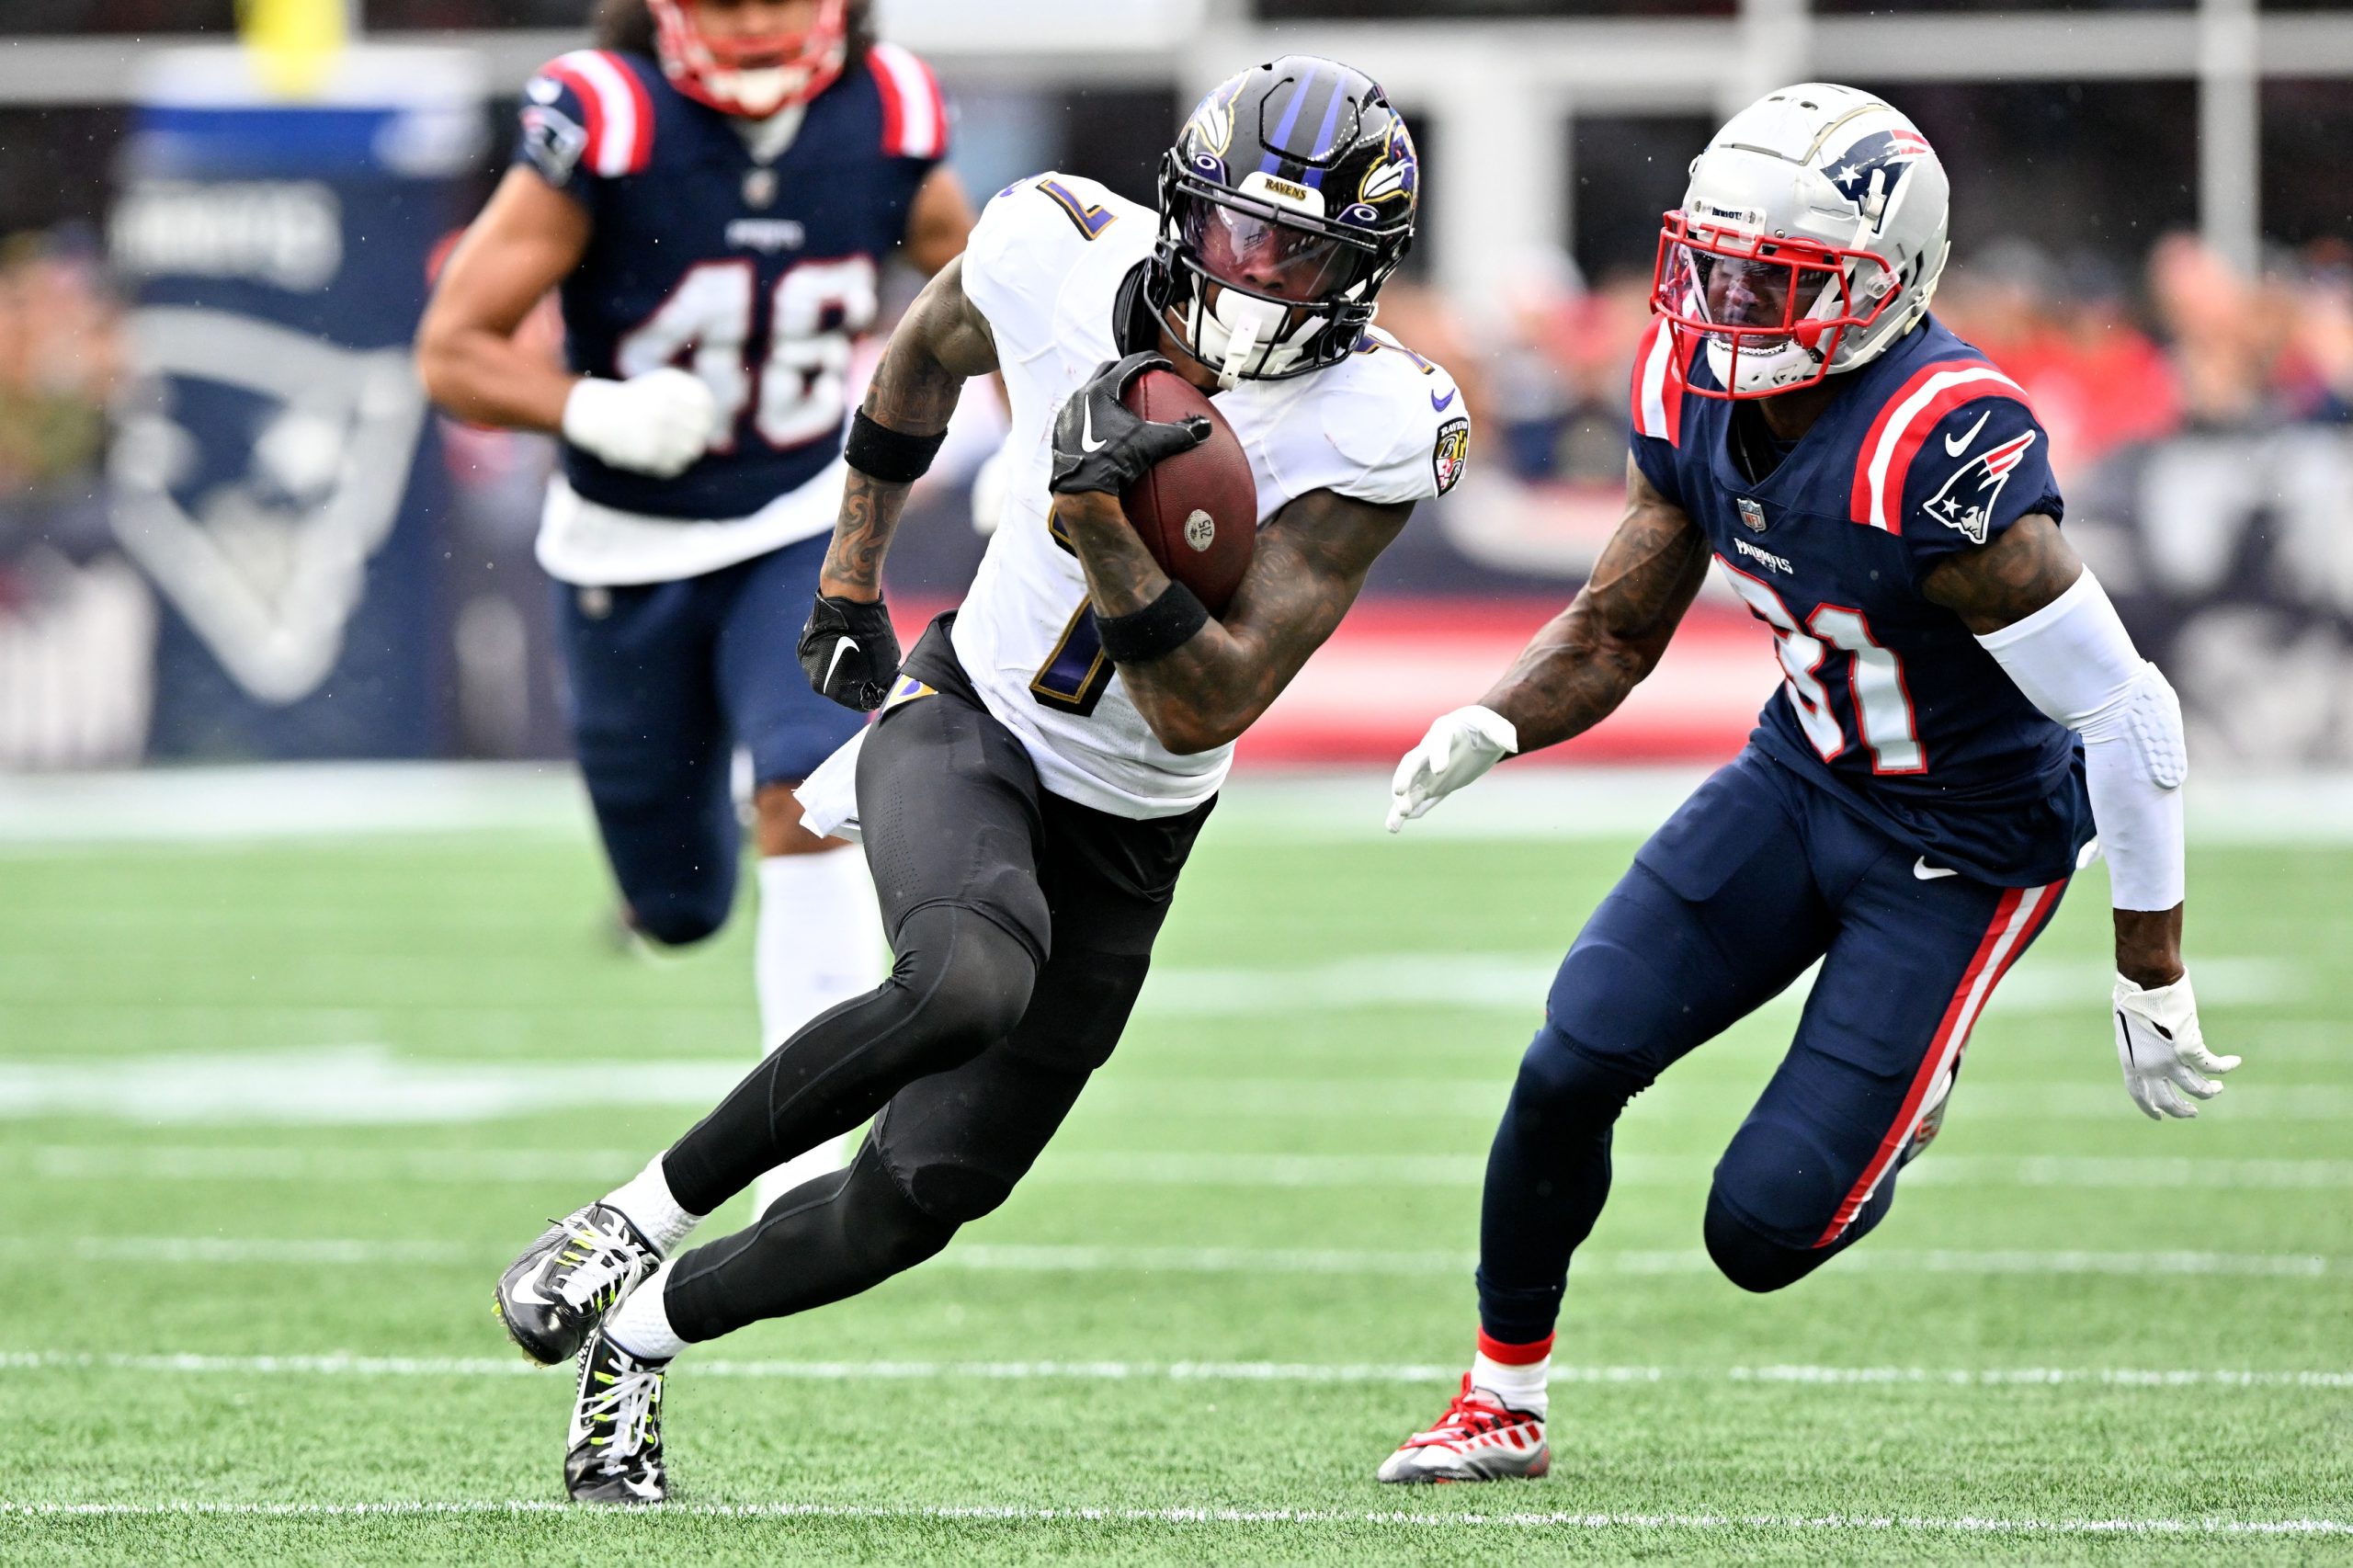 3 Breakout Candidates at Wide Receiver for 2022 Fantasy Football